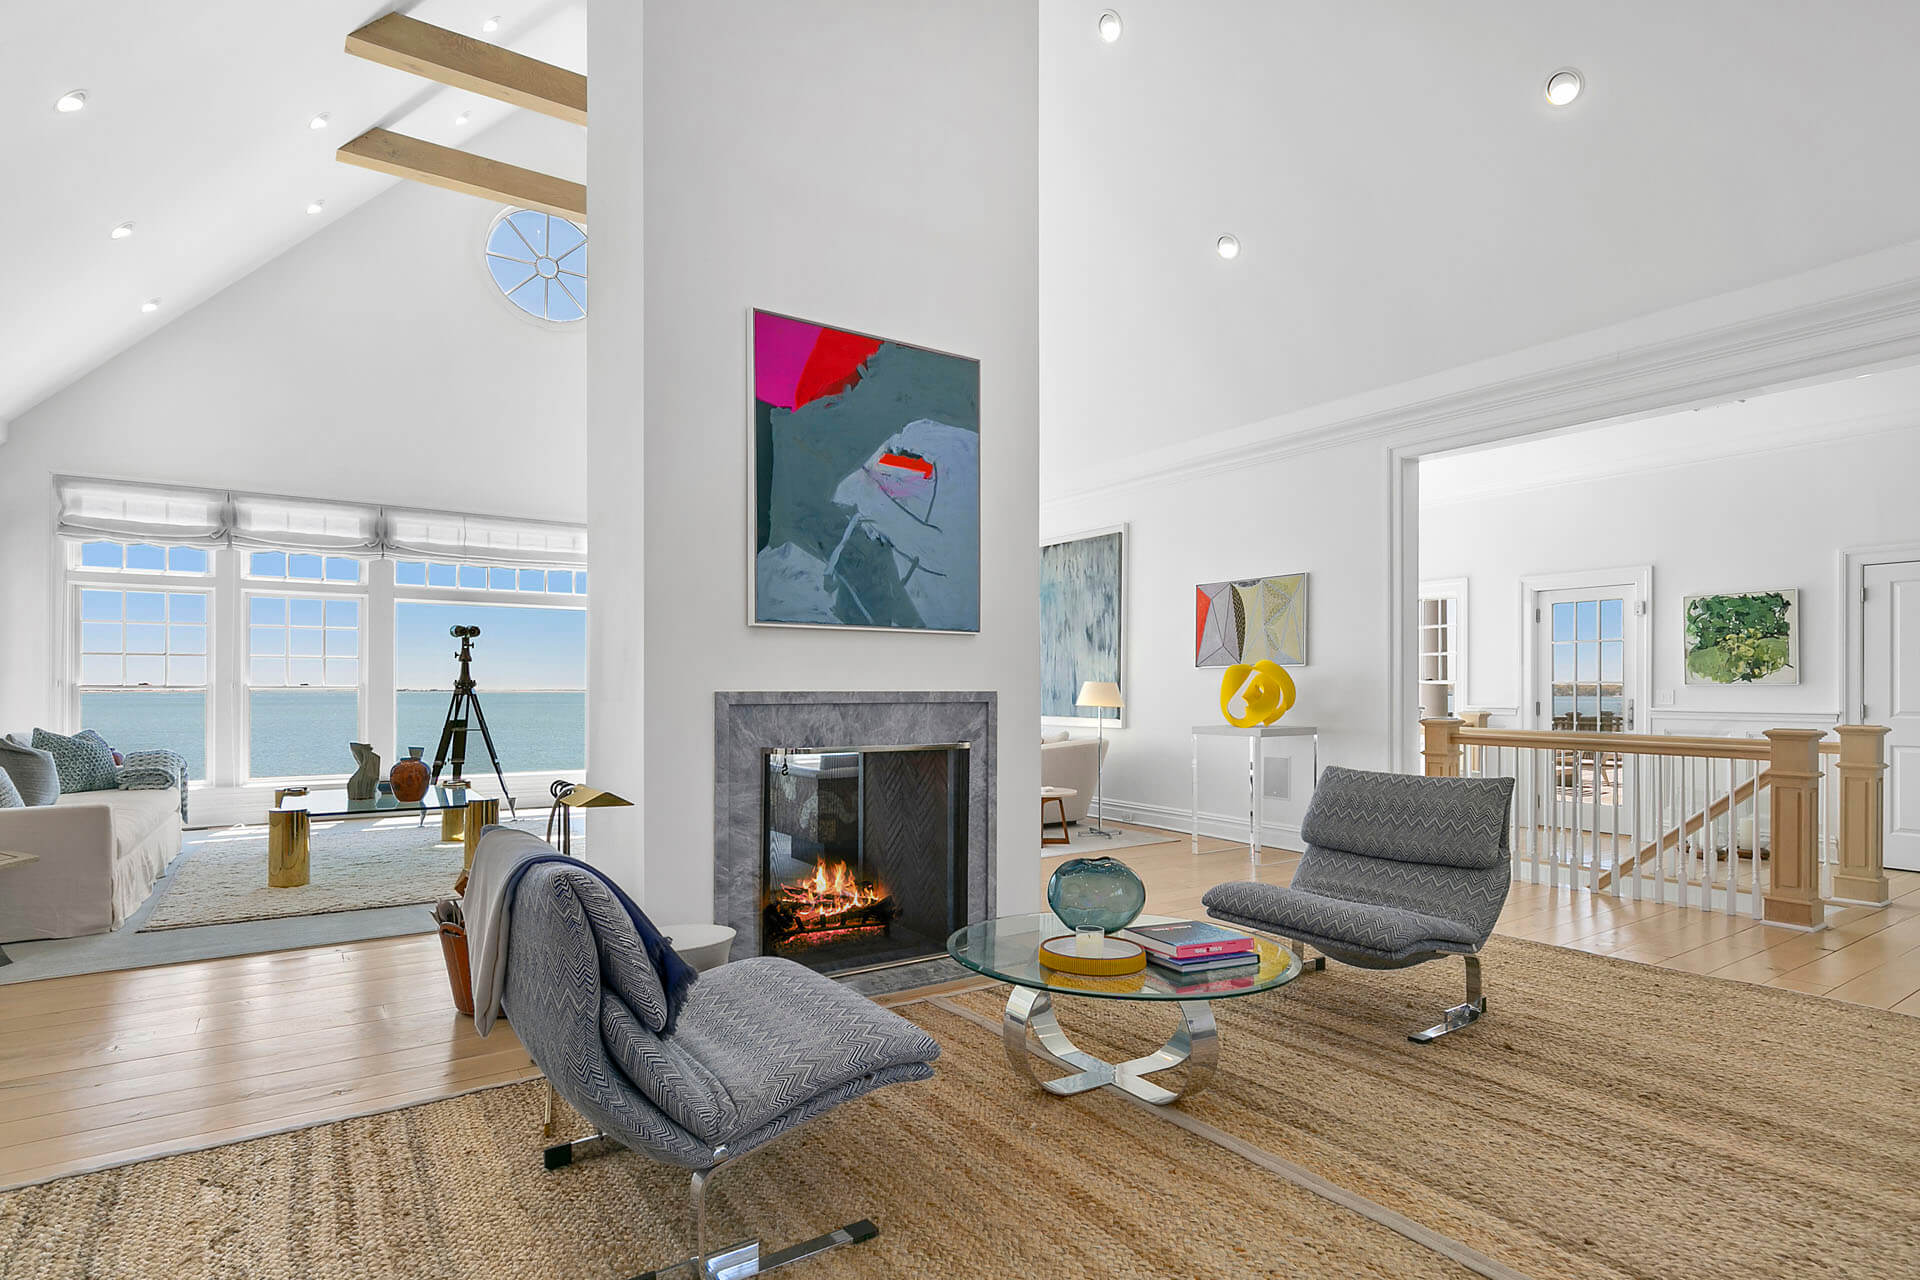 Seating area with a fireplace and ocean views